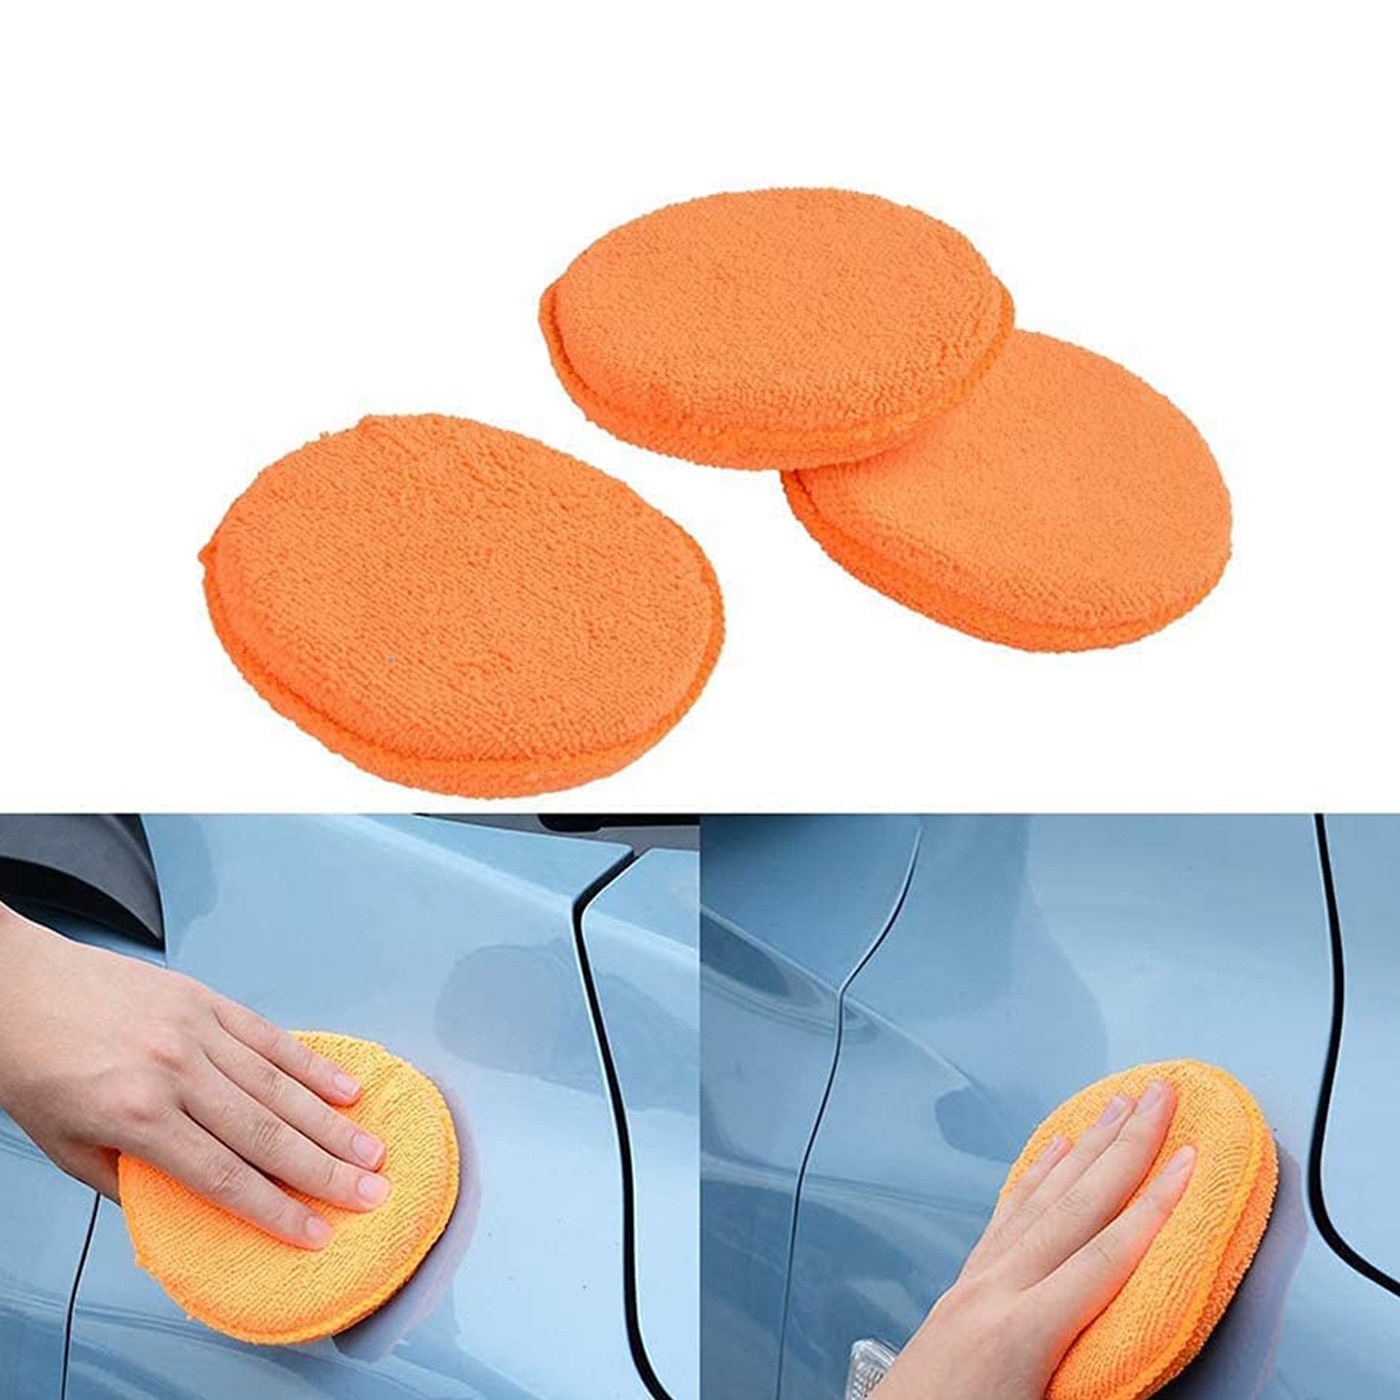 Microfiber cleaning set gift cleaning tool 9 pieces car wash set